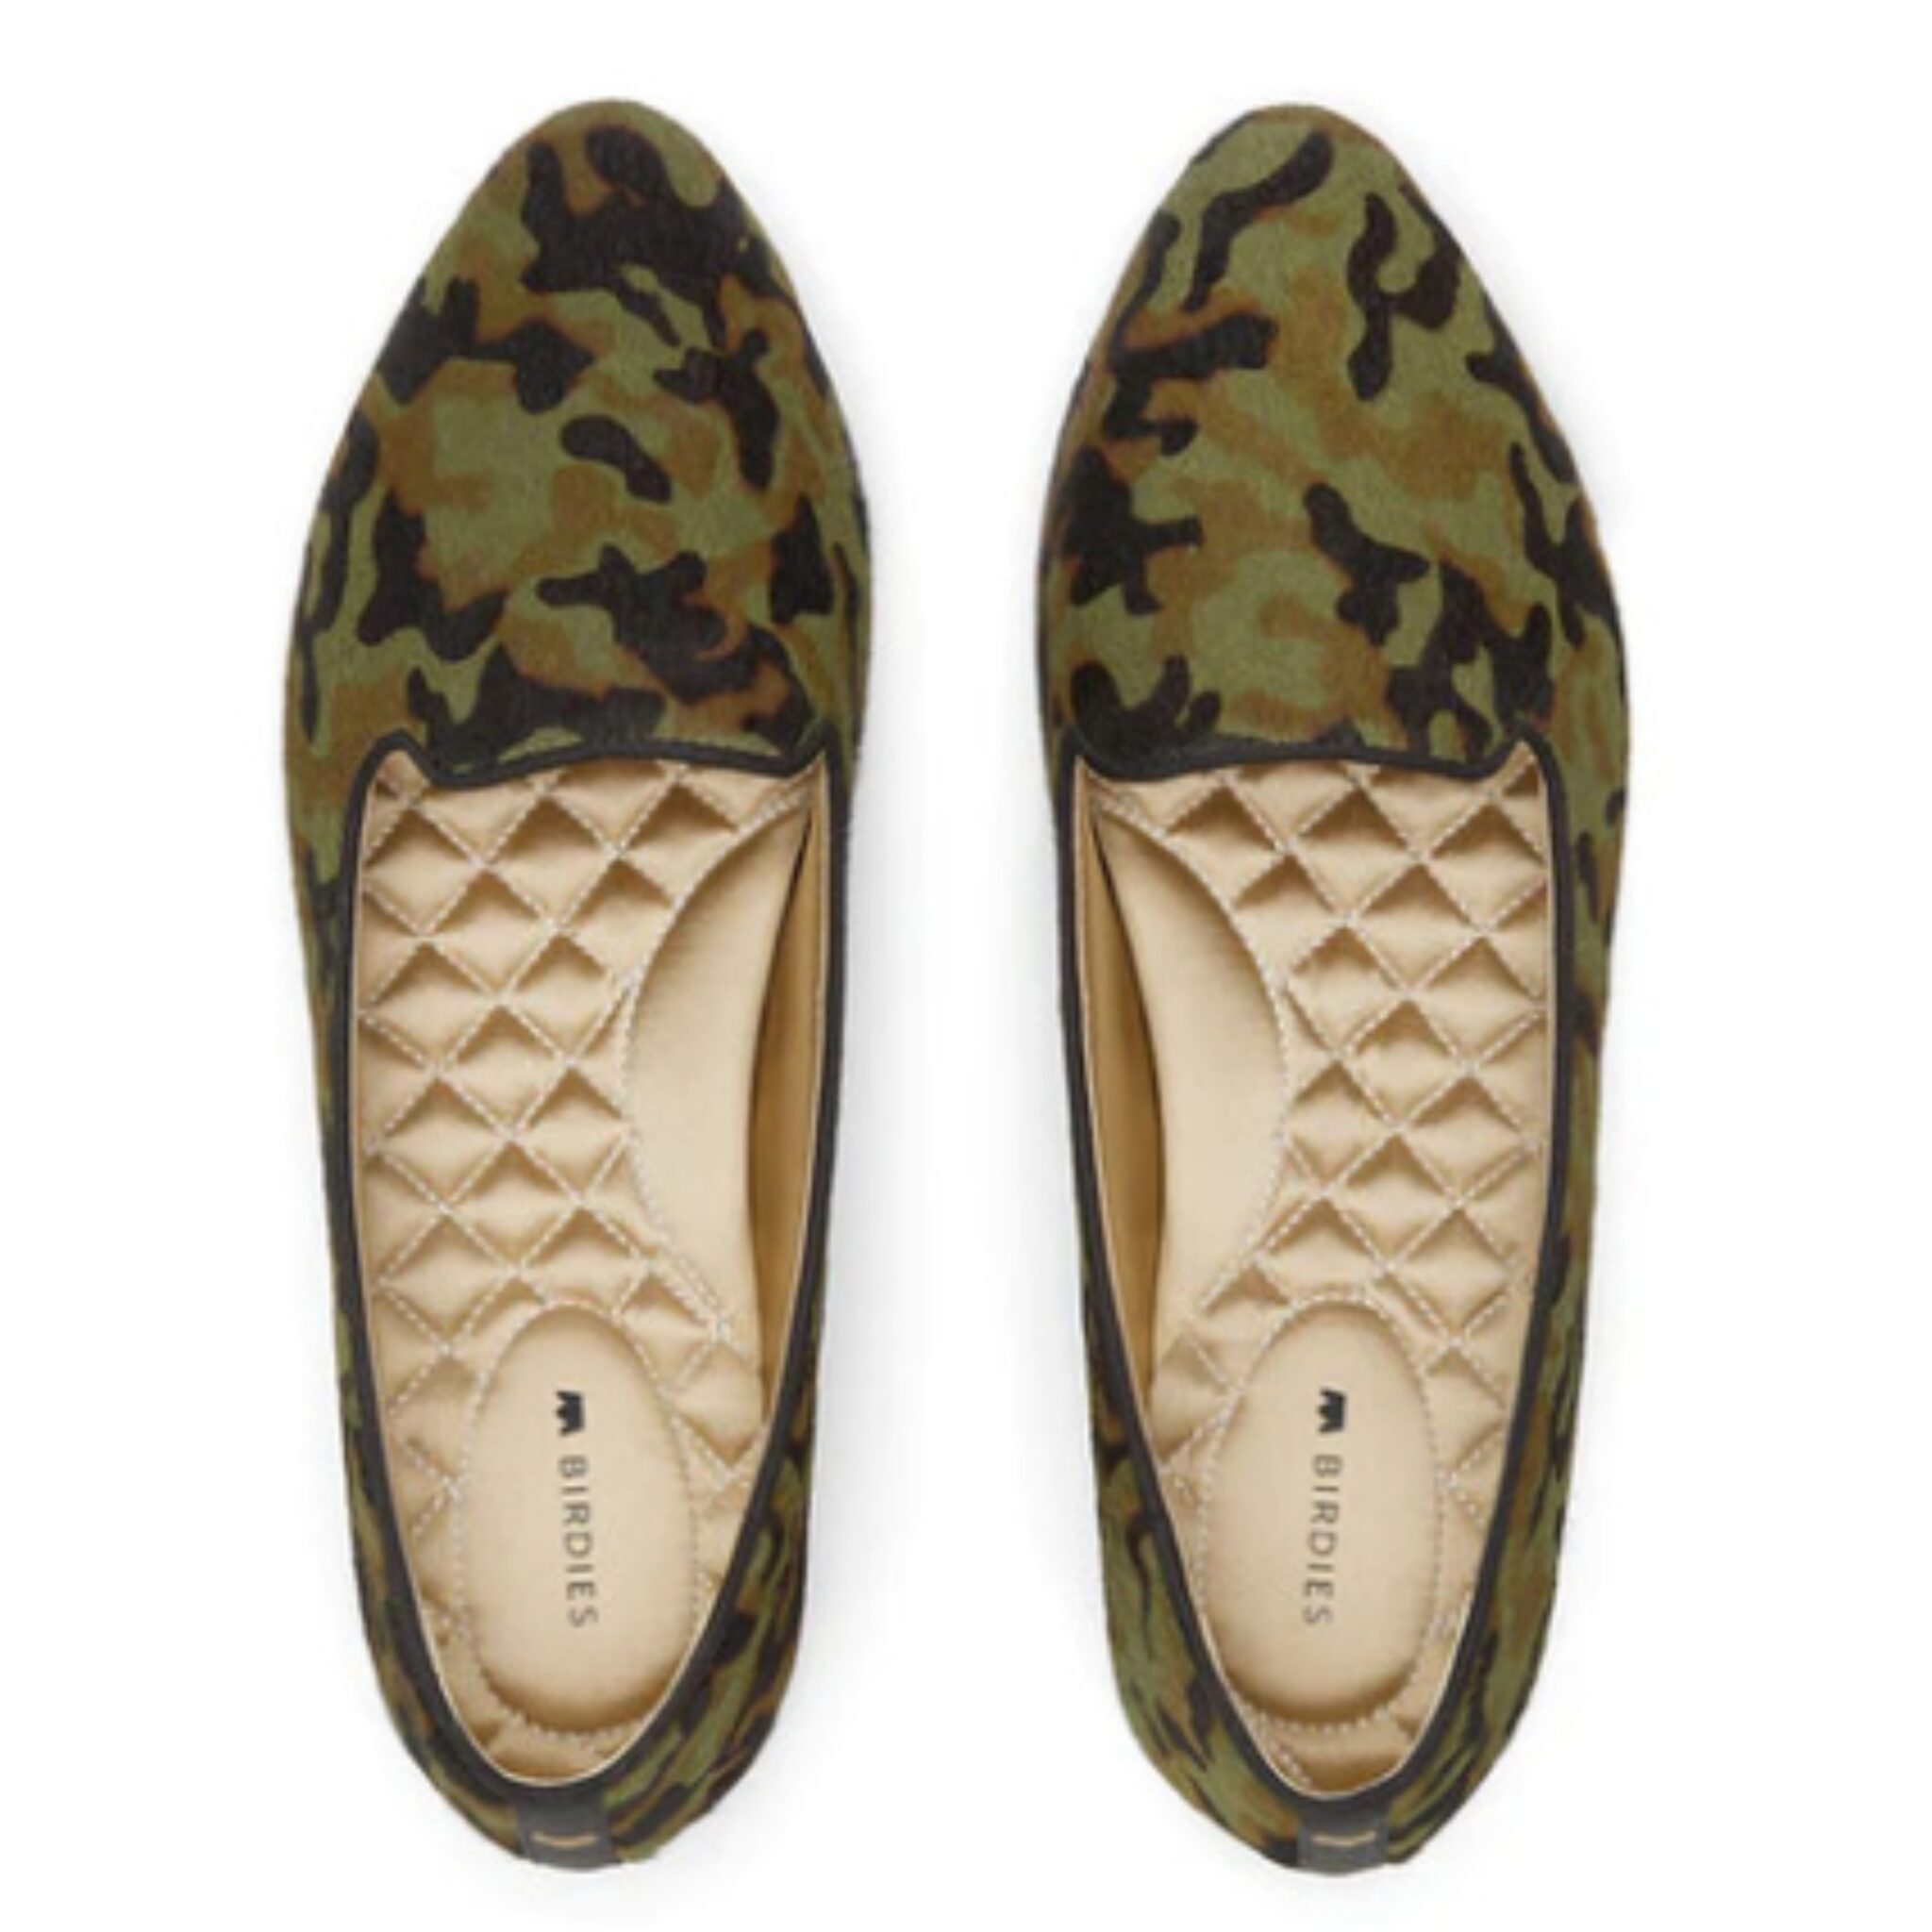 Camo slippers that were once Oprah's Favorite Slippers.